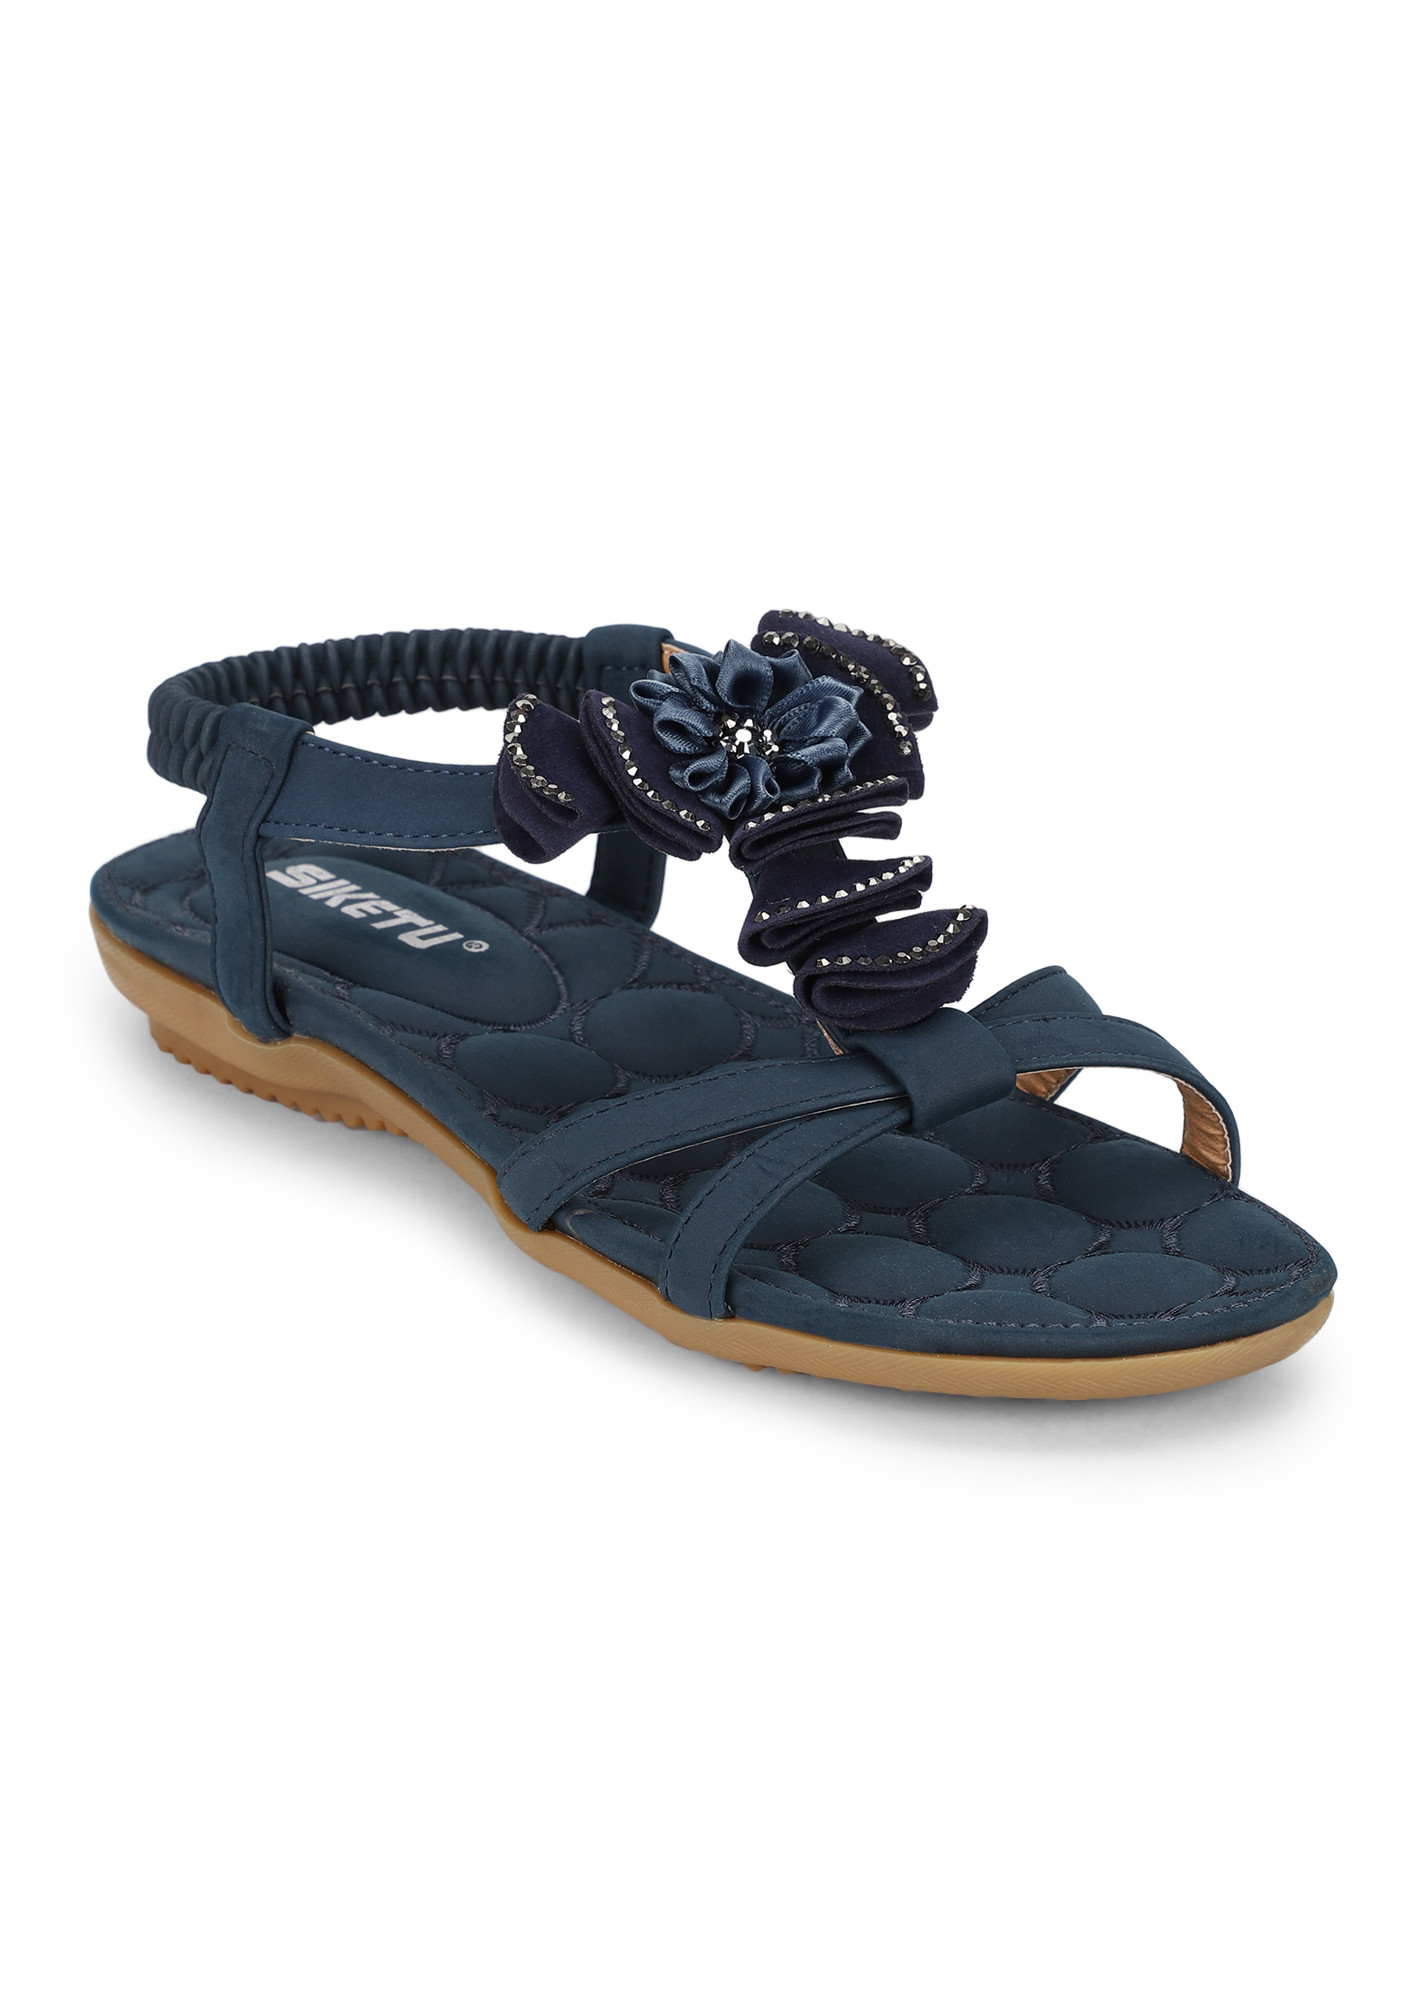 GROWING A SEQUINED FLOWER NAVY FLAT SANDALS